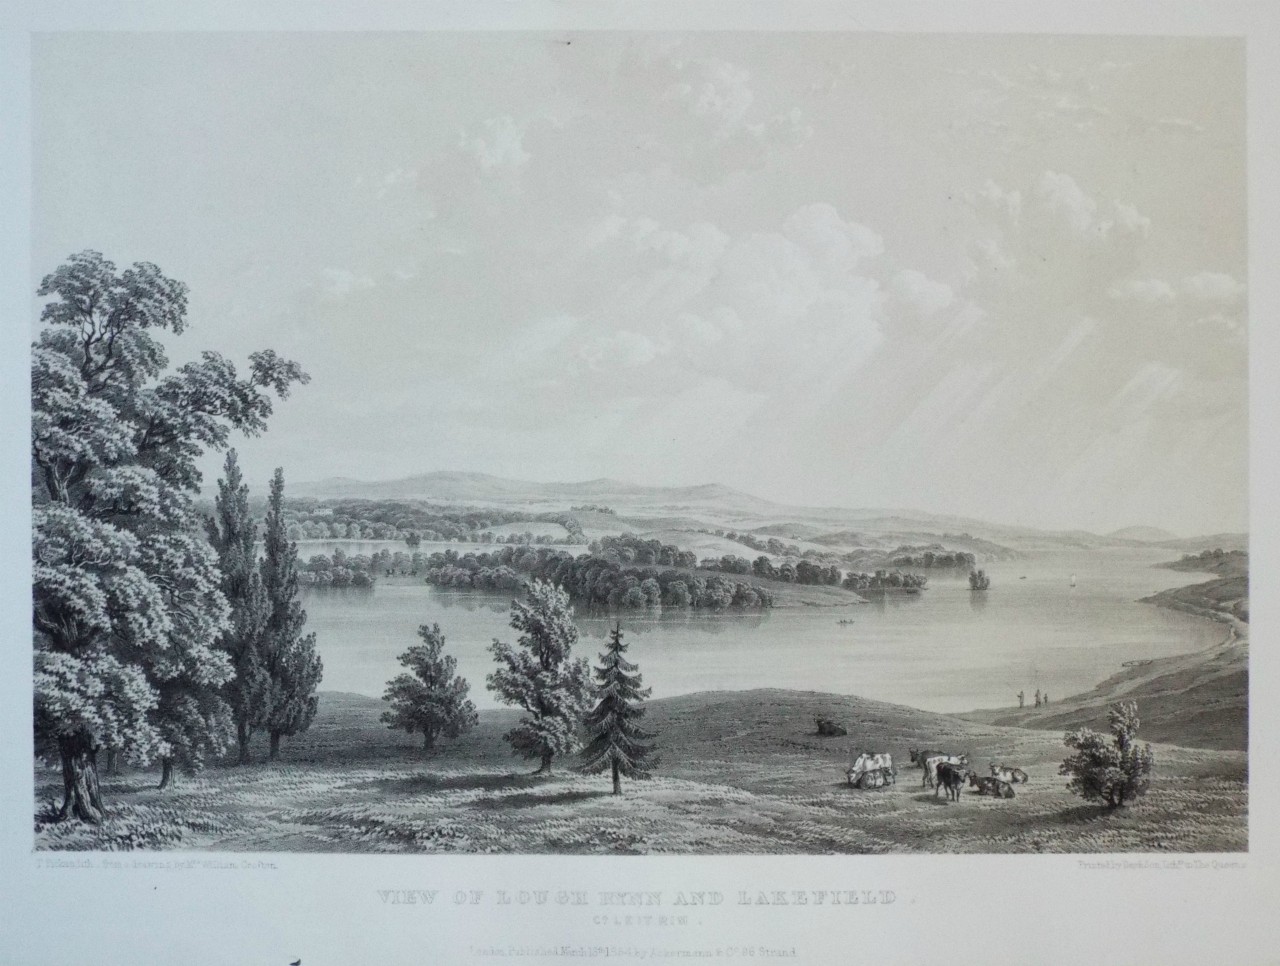 Lithograph - View of Lough Rynn and Lakefield. Co. Leitrim. - Picken